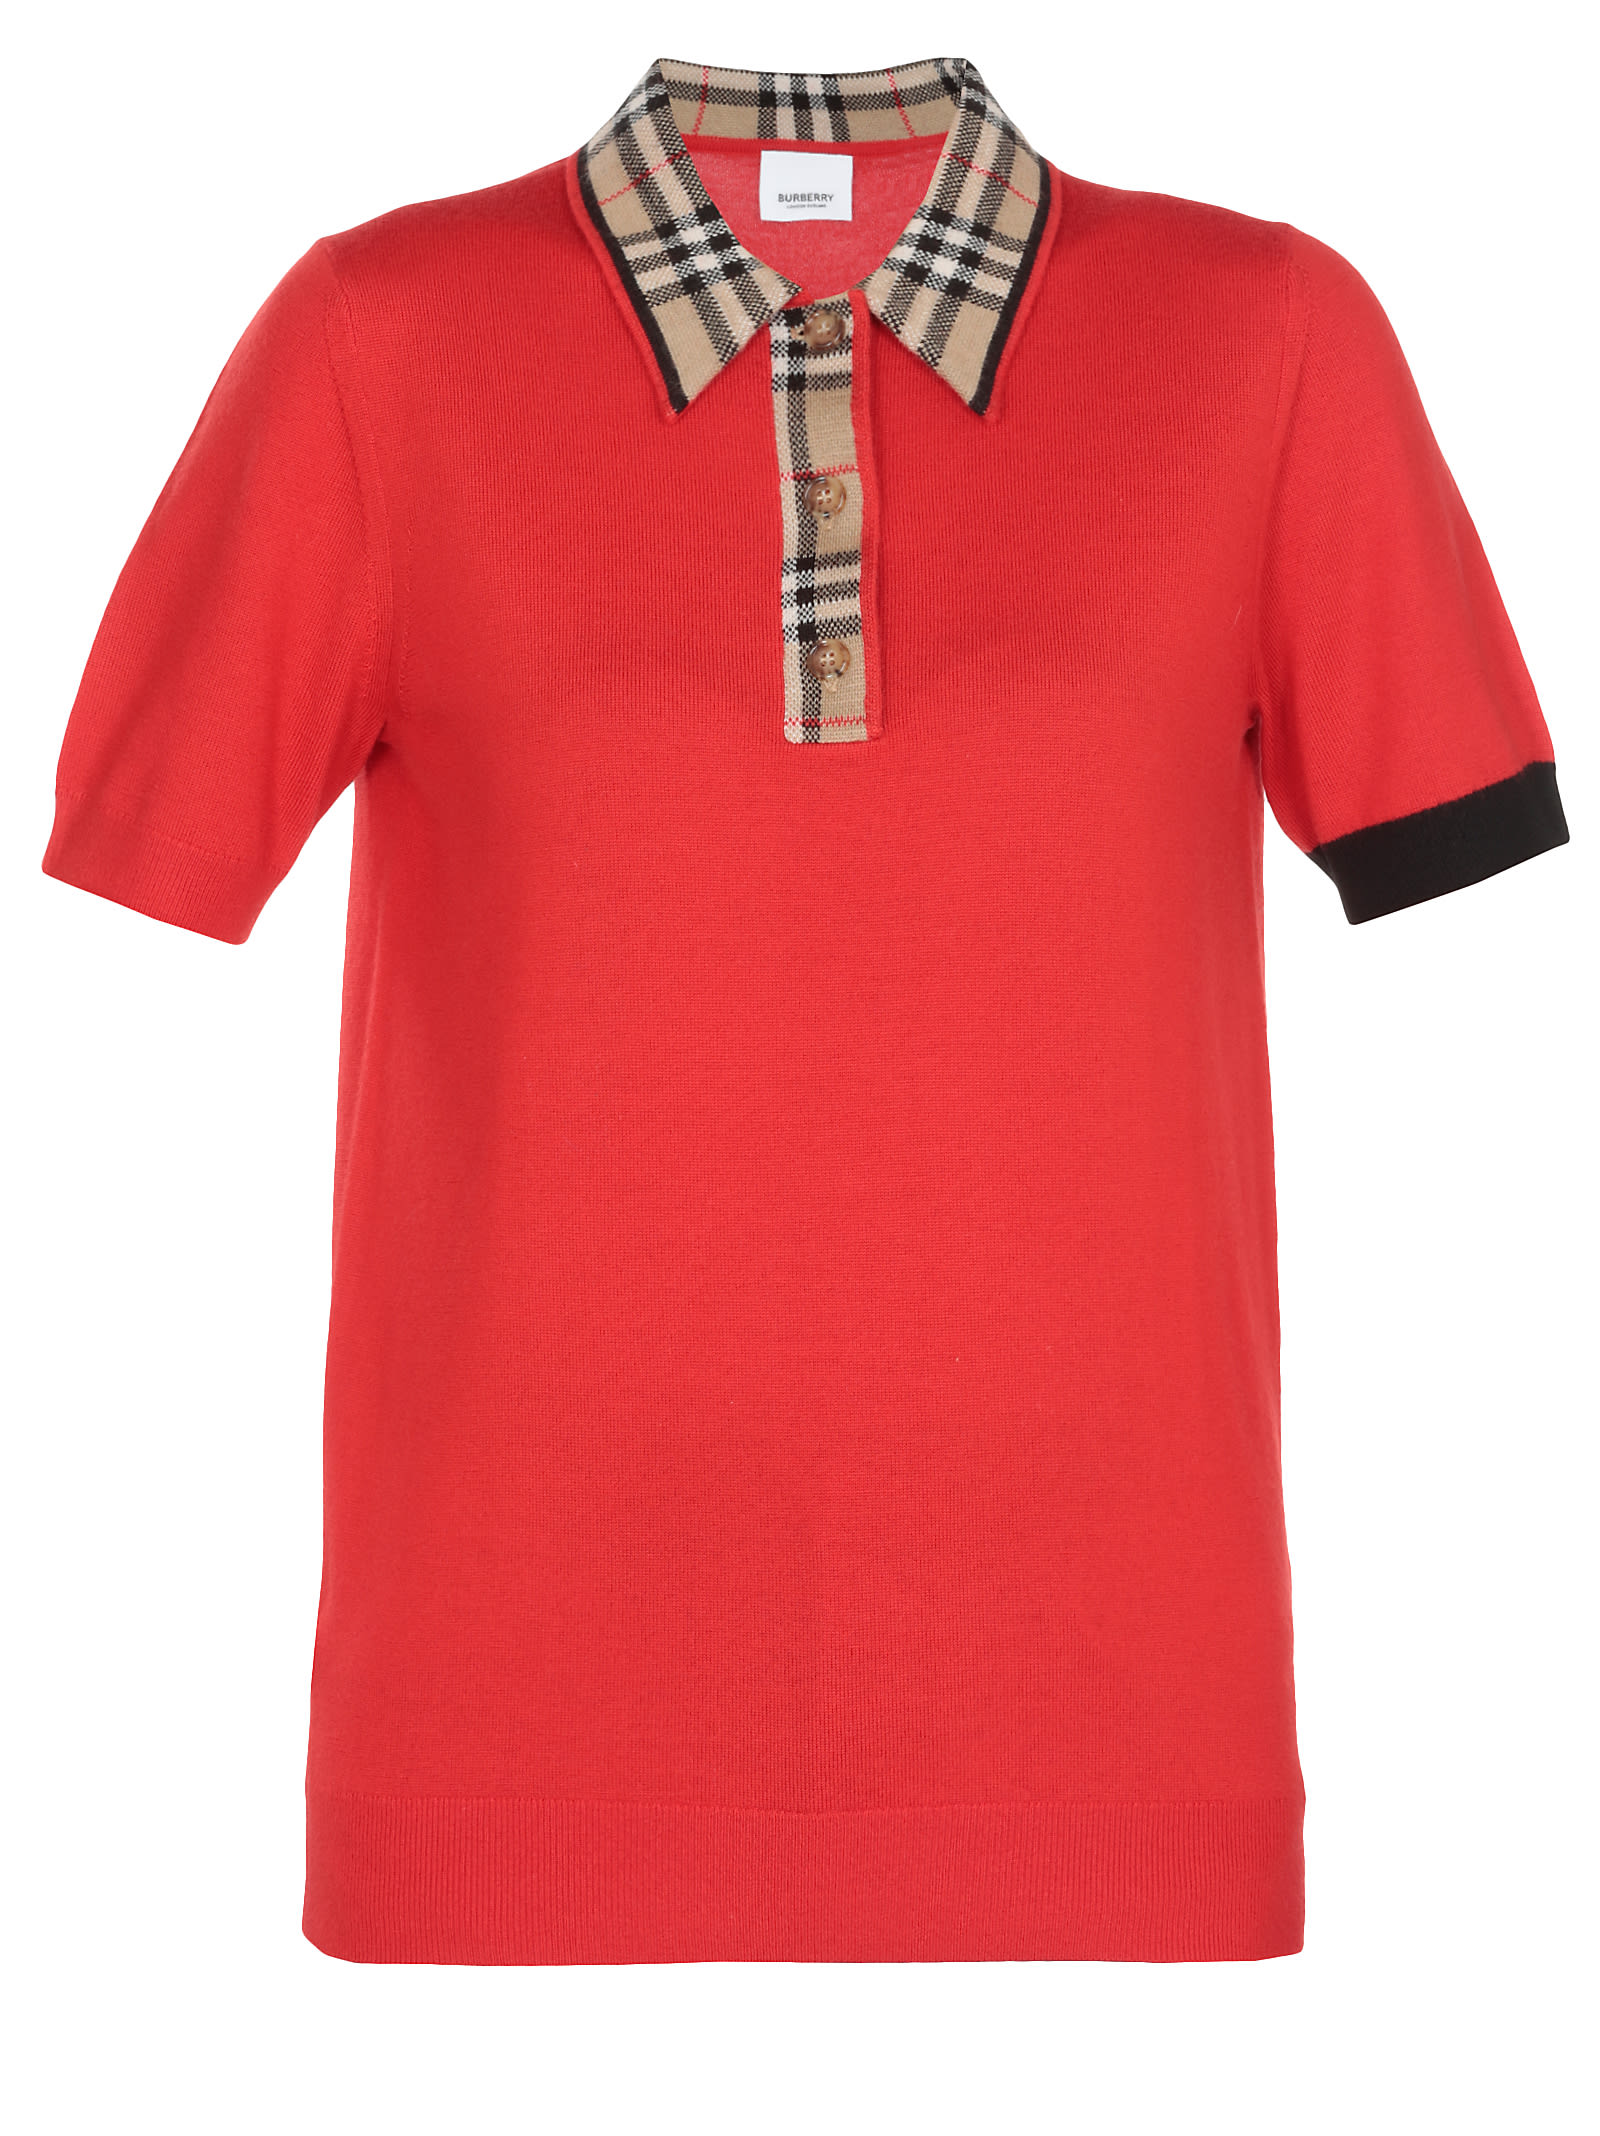 Burberry Penk Polo In Bright Red